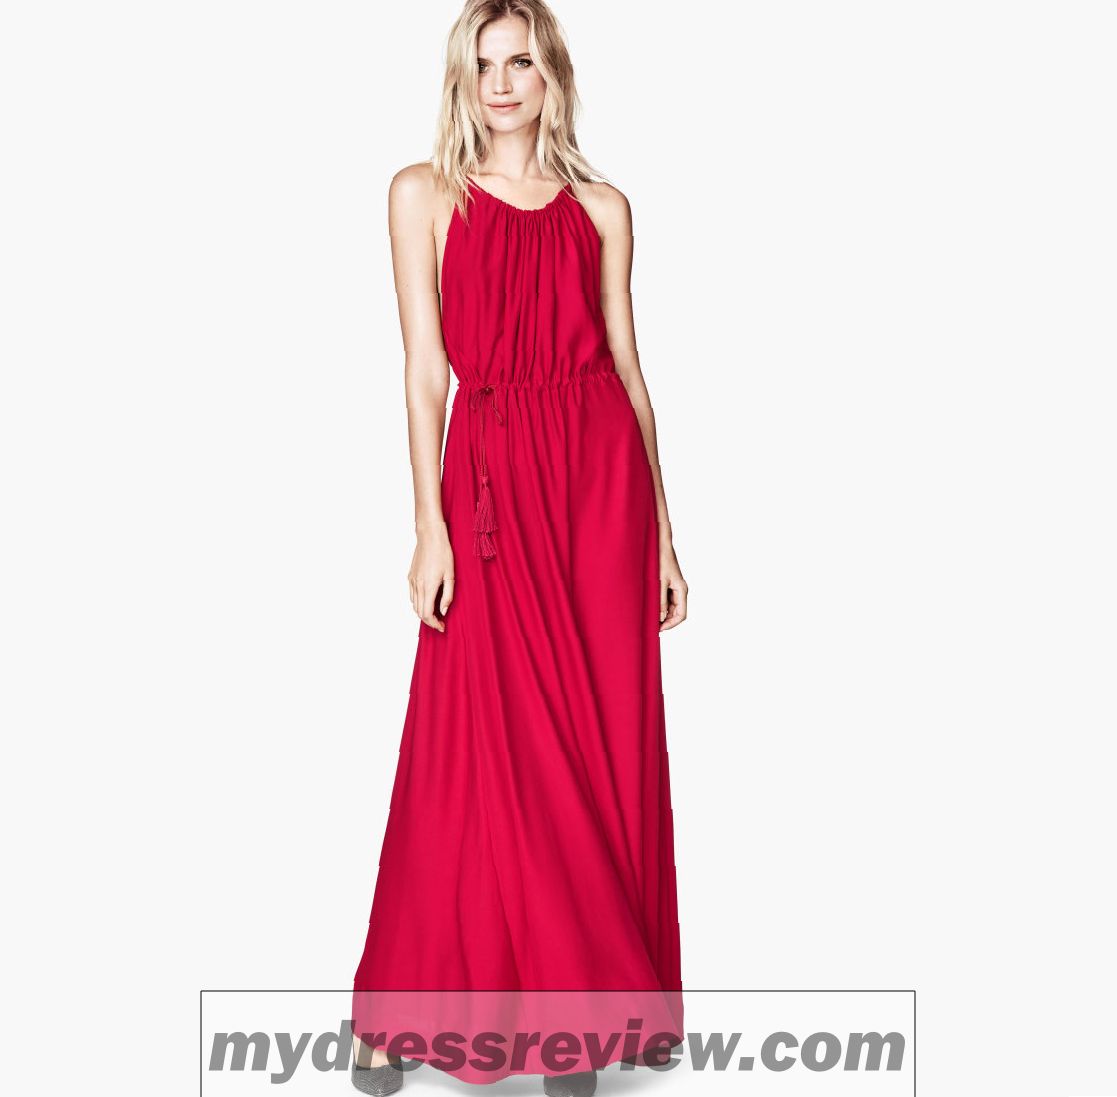 Designer One Piece Long Dress & Things To Know Before Choosing